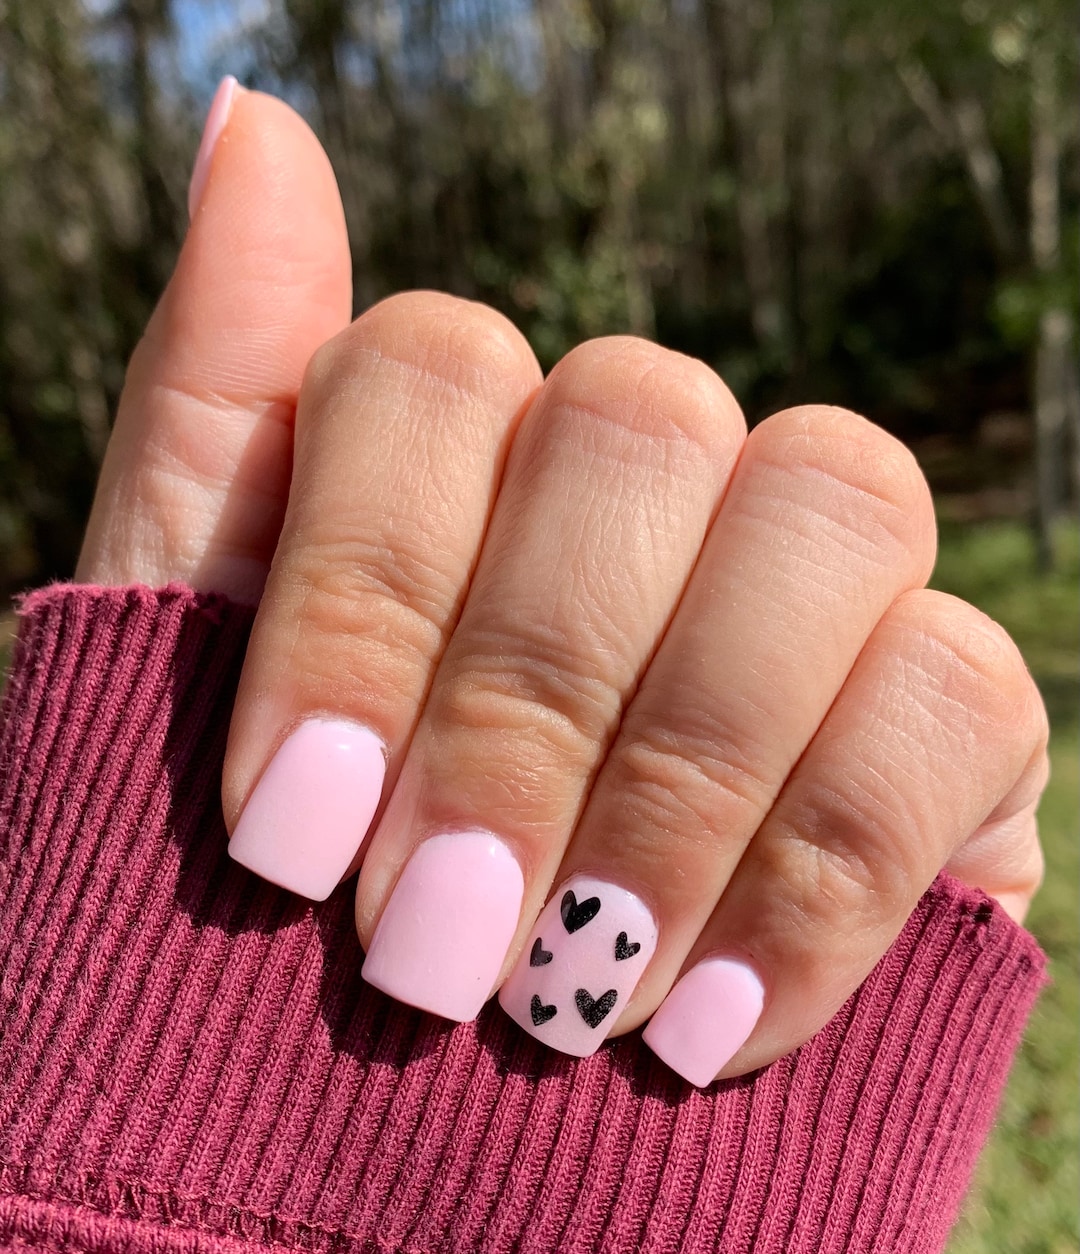 Press on Heart Pattern Fake Nail Nude Pink Fake Nail with Heart Flower Line Design for Girlfriends Sisters Wife Friends As Gift